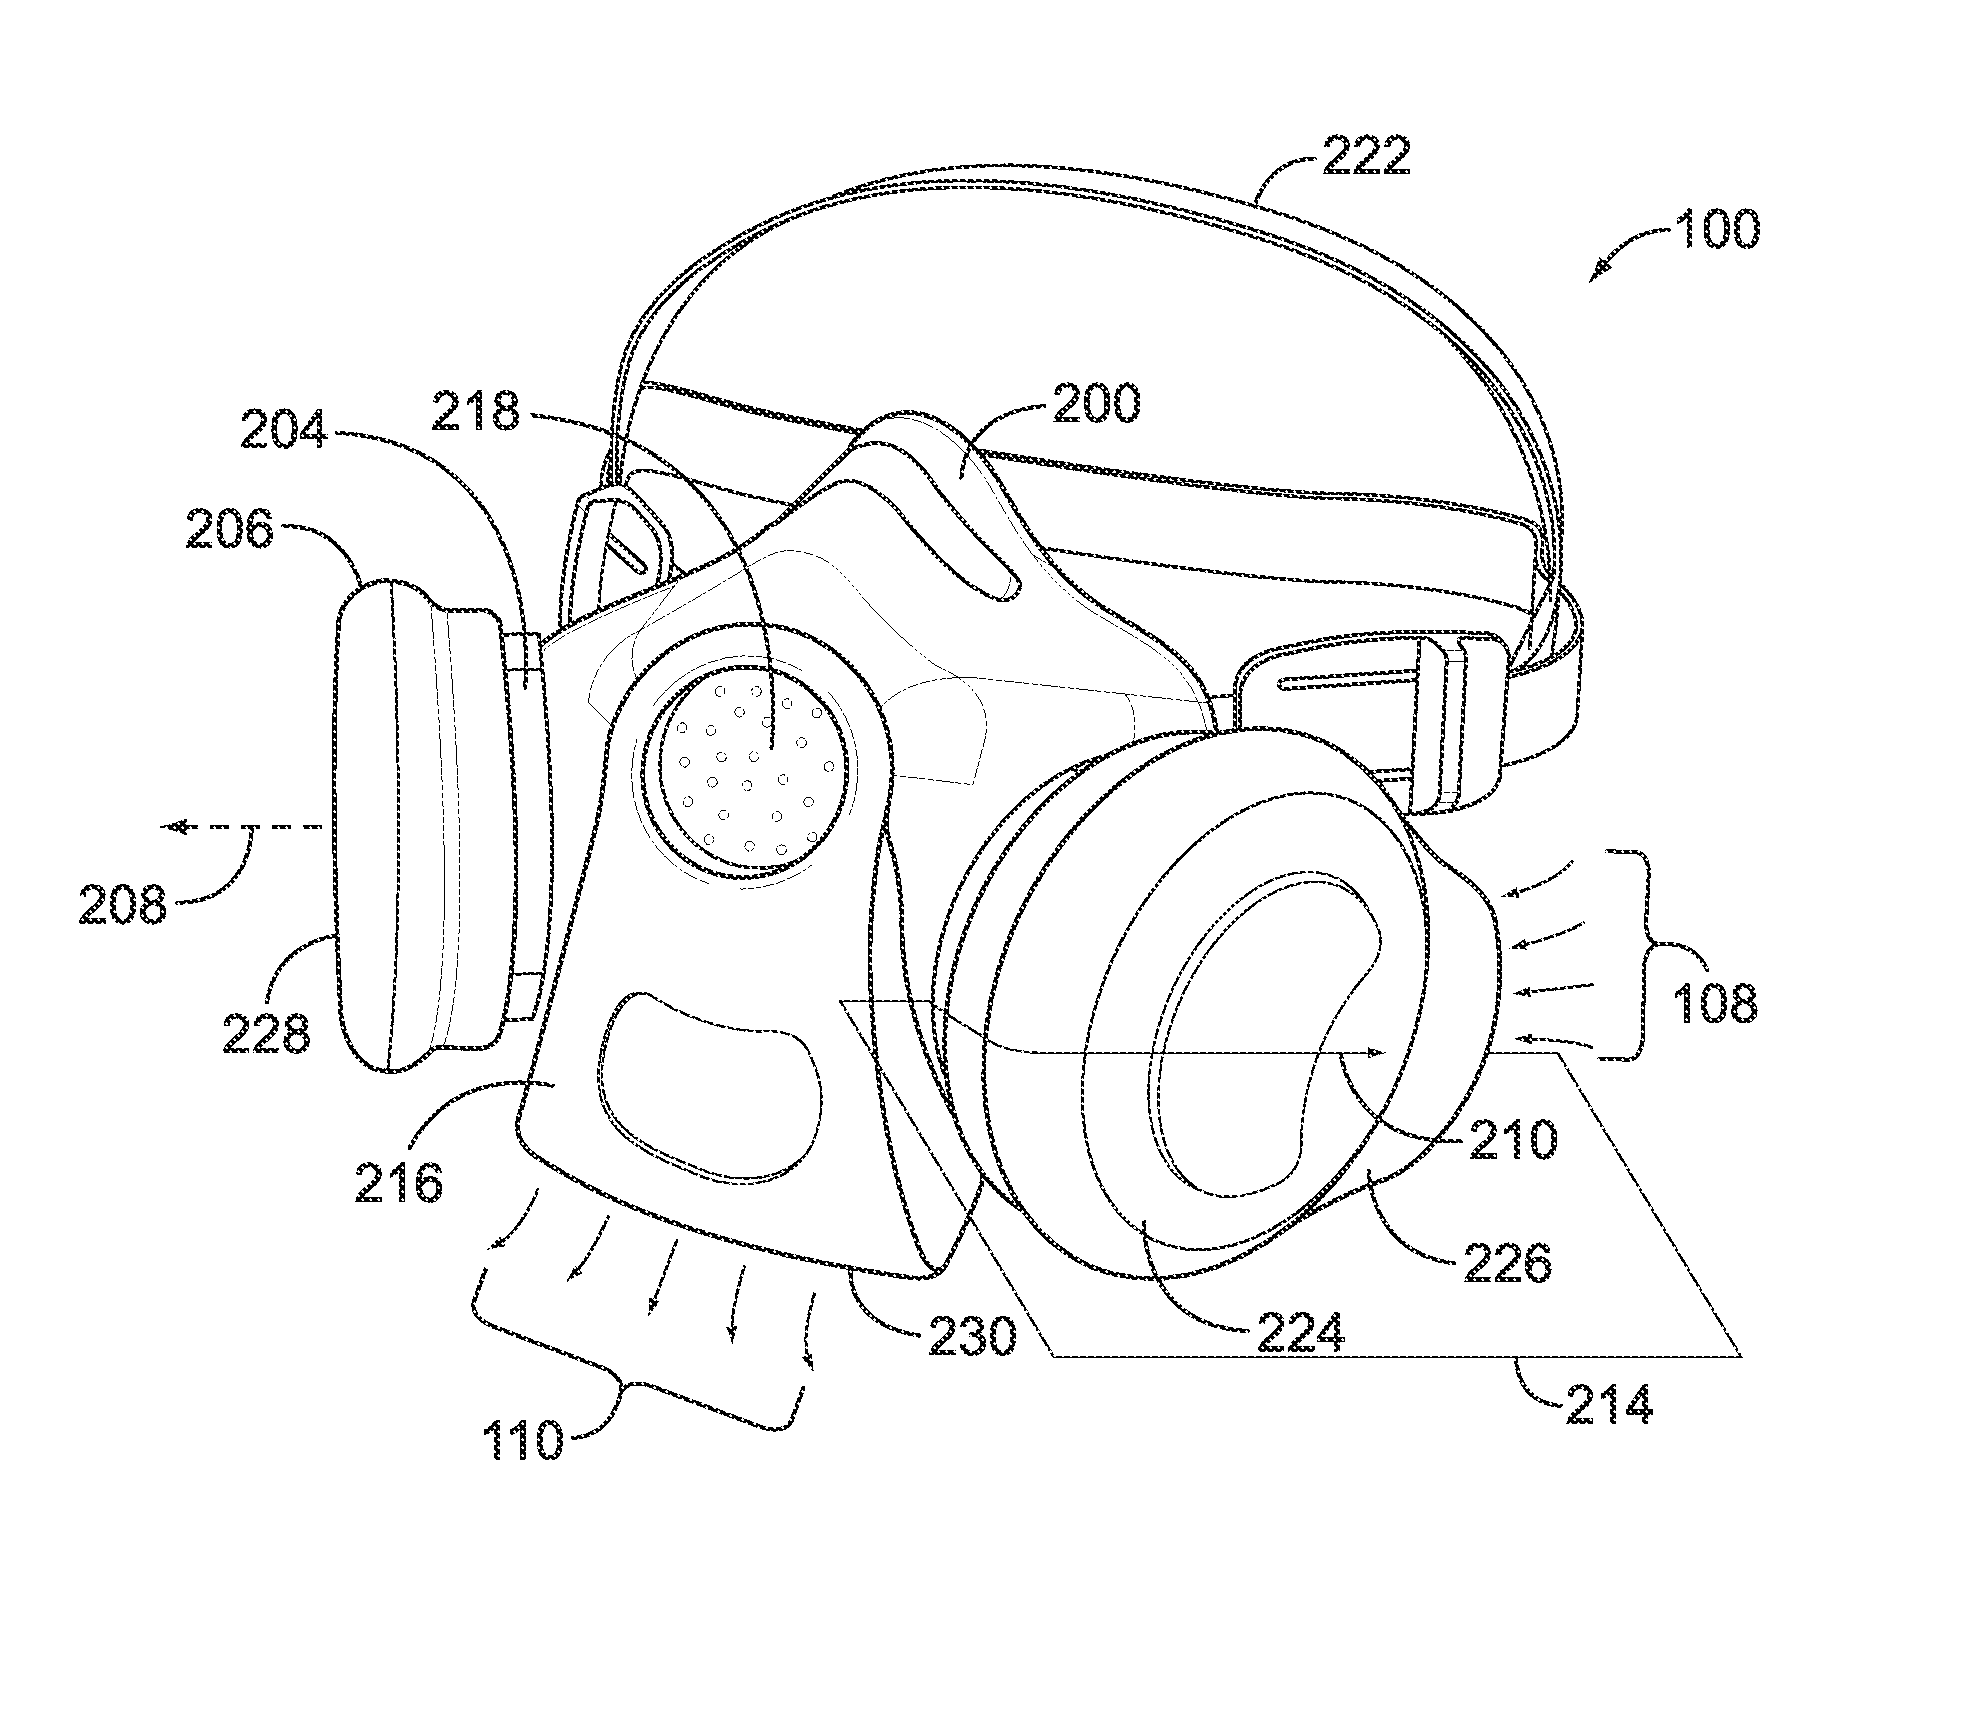 Air purifying respirator having inhalation and exhalation ducts to reduce rate of pathogen transmission